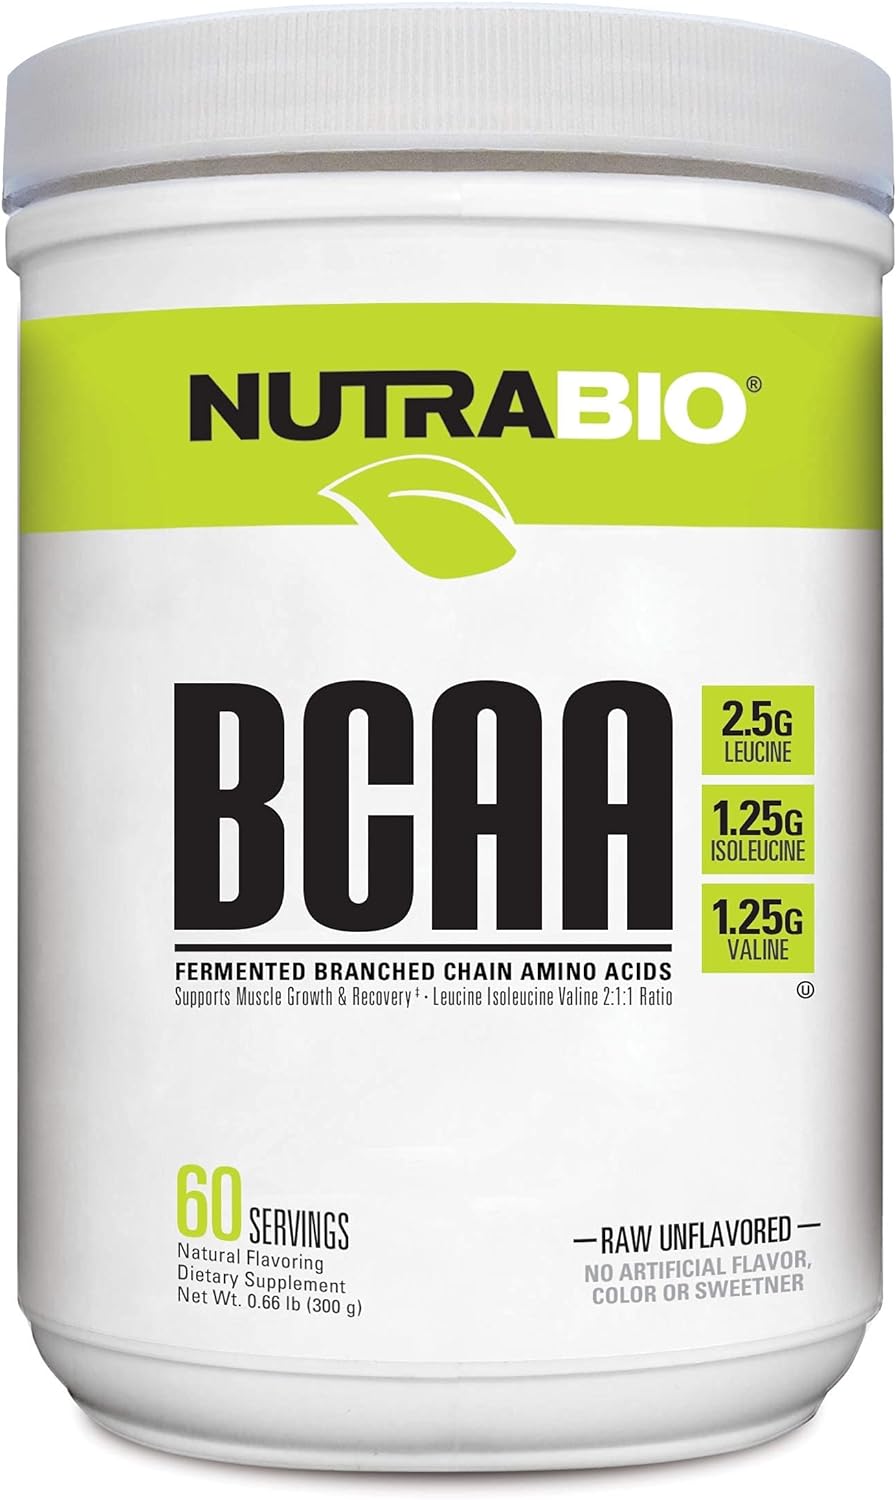 NutraBio BCAA 5000 Powder - Fermented Branched Chain Amino Acids for Muscle Growth & Recovery - Natural Flavors, Sweeteners, and Coloring, Vegan, Gluten Free - Unflavored, 60 Servings